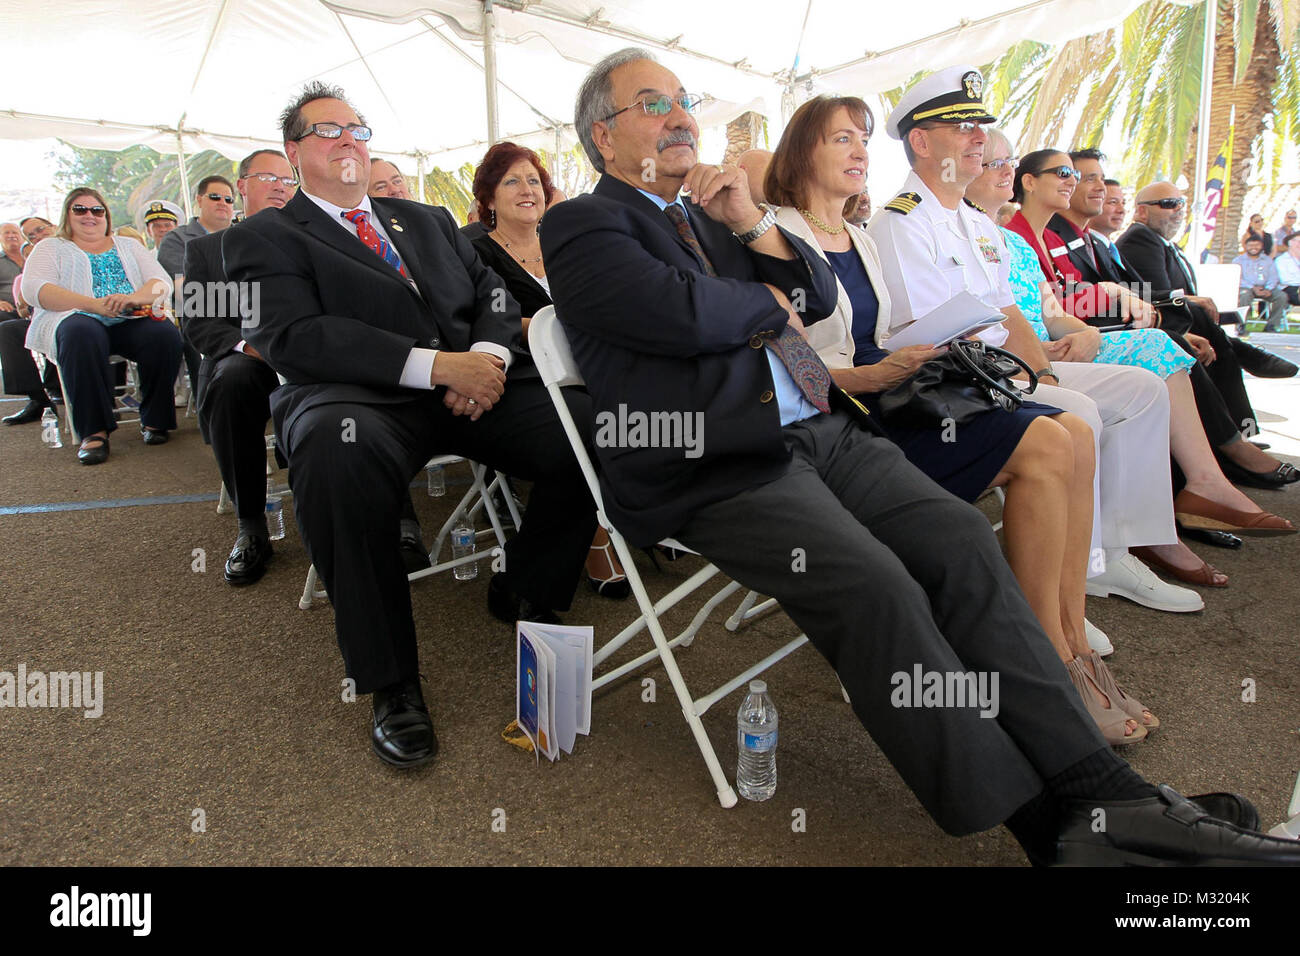 140801-N-HW977-252 NORCO, Calif. (Aug. 1, 2014) Dignitaries, including Reza Abbaschian, University of California , Riverside Bourns College of Engineering dean, center right, and Bobby Spiegel president/CEO of Corona Chamber of Commerce, watch Change of Command ceremony at Naval Surface Warfare Center (NSWC), Corona Division, tranferring the reins from Capt. Eric Ver Hage to Capt. (Sel) Steve Murray. In his keynote address Rear Adm. Lawrence Creevy, commander, Naval Surface Warfare Center, remarked Ver Hage's most important qualities were vision, accomplishment and leadership. Creevy's list of Stock Photo